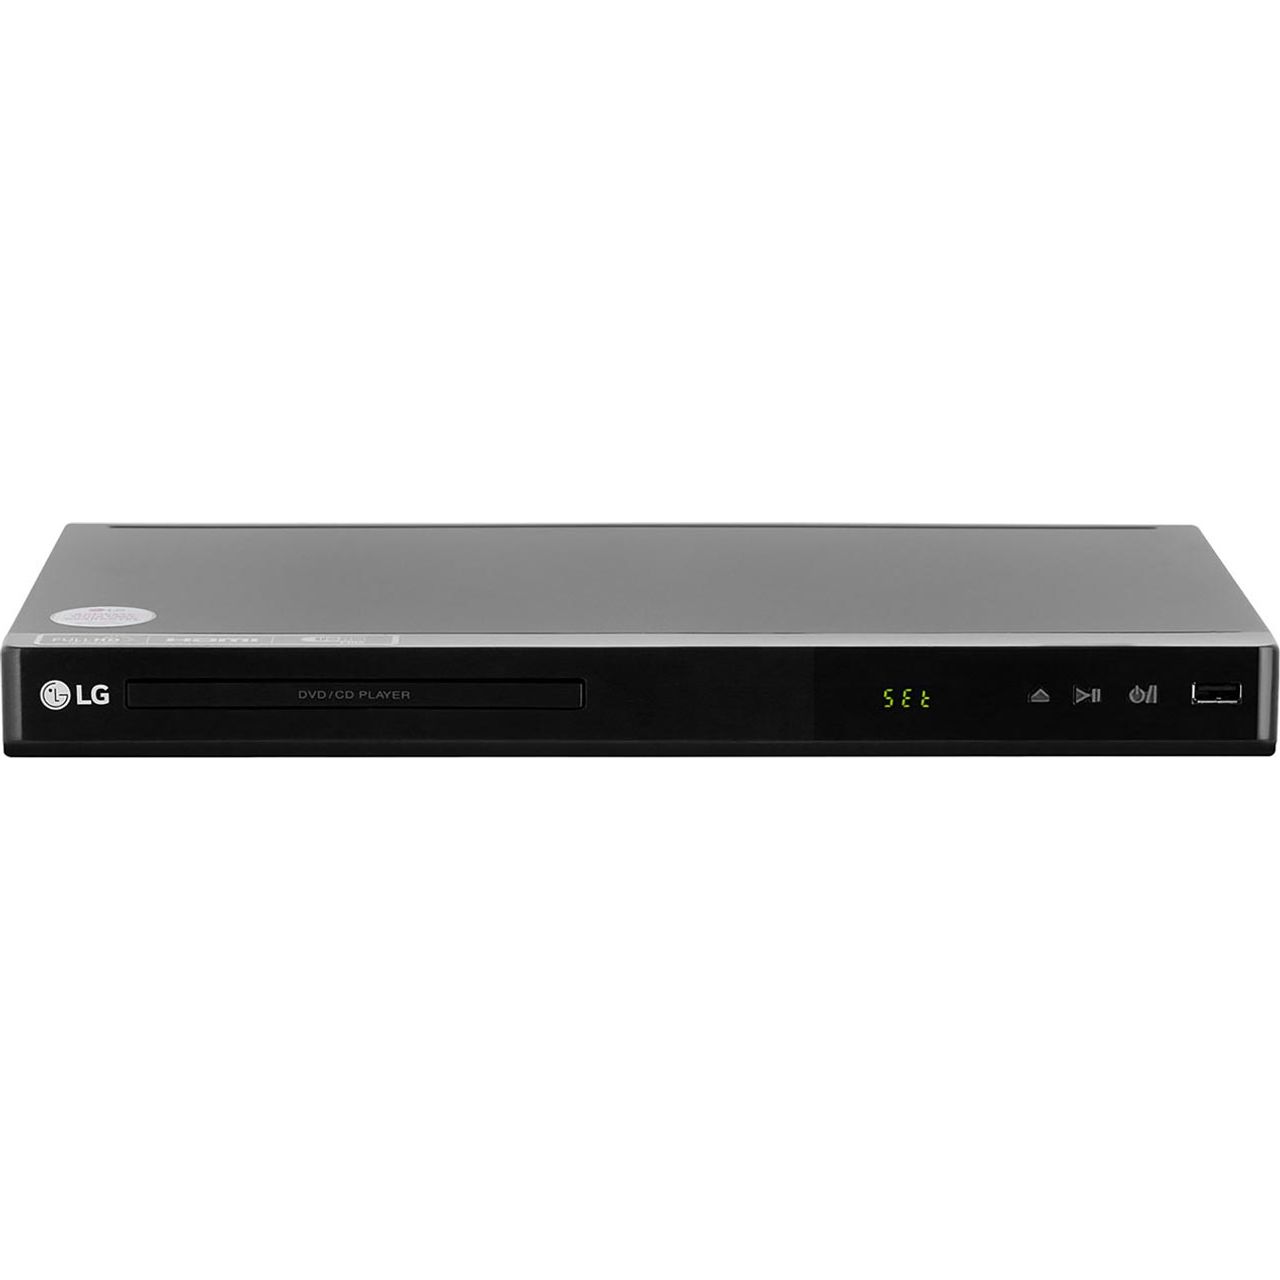 LG DP542H DVD Player Review